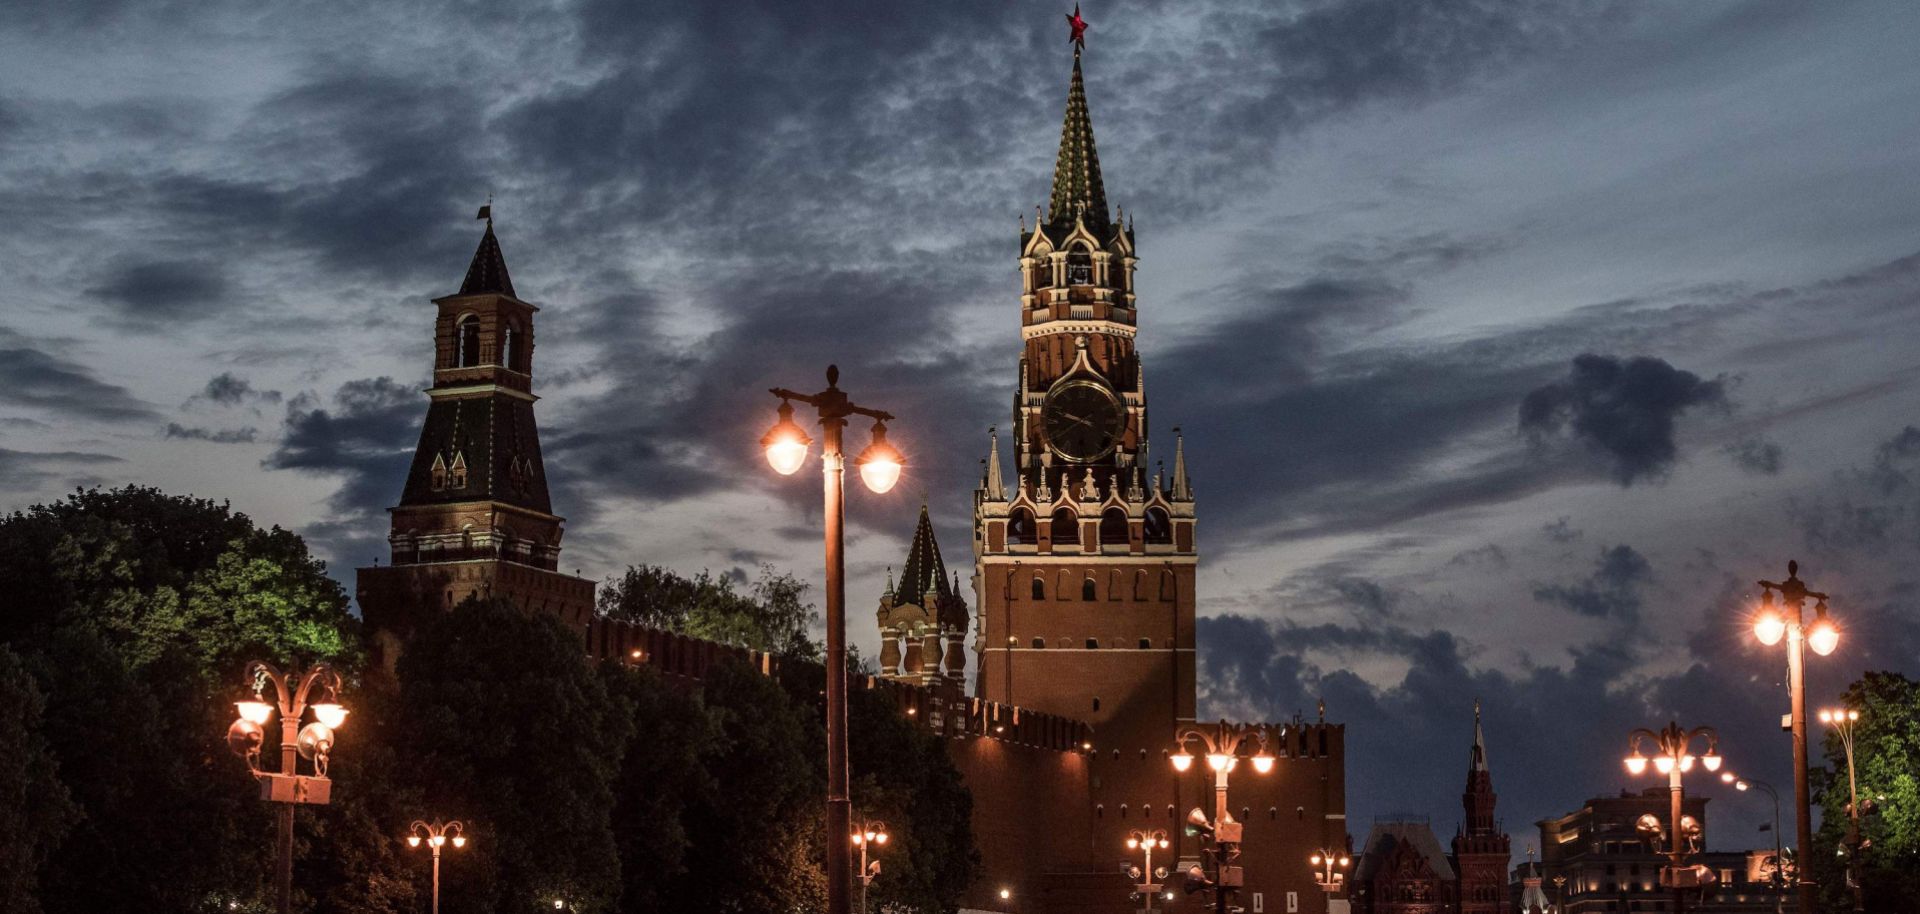 The Kremlin in Moscow, in a photo taken on June 8, 2017.